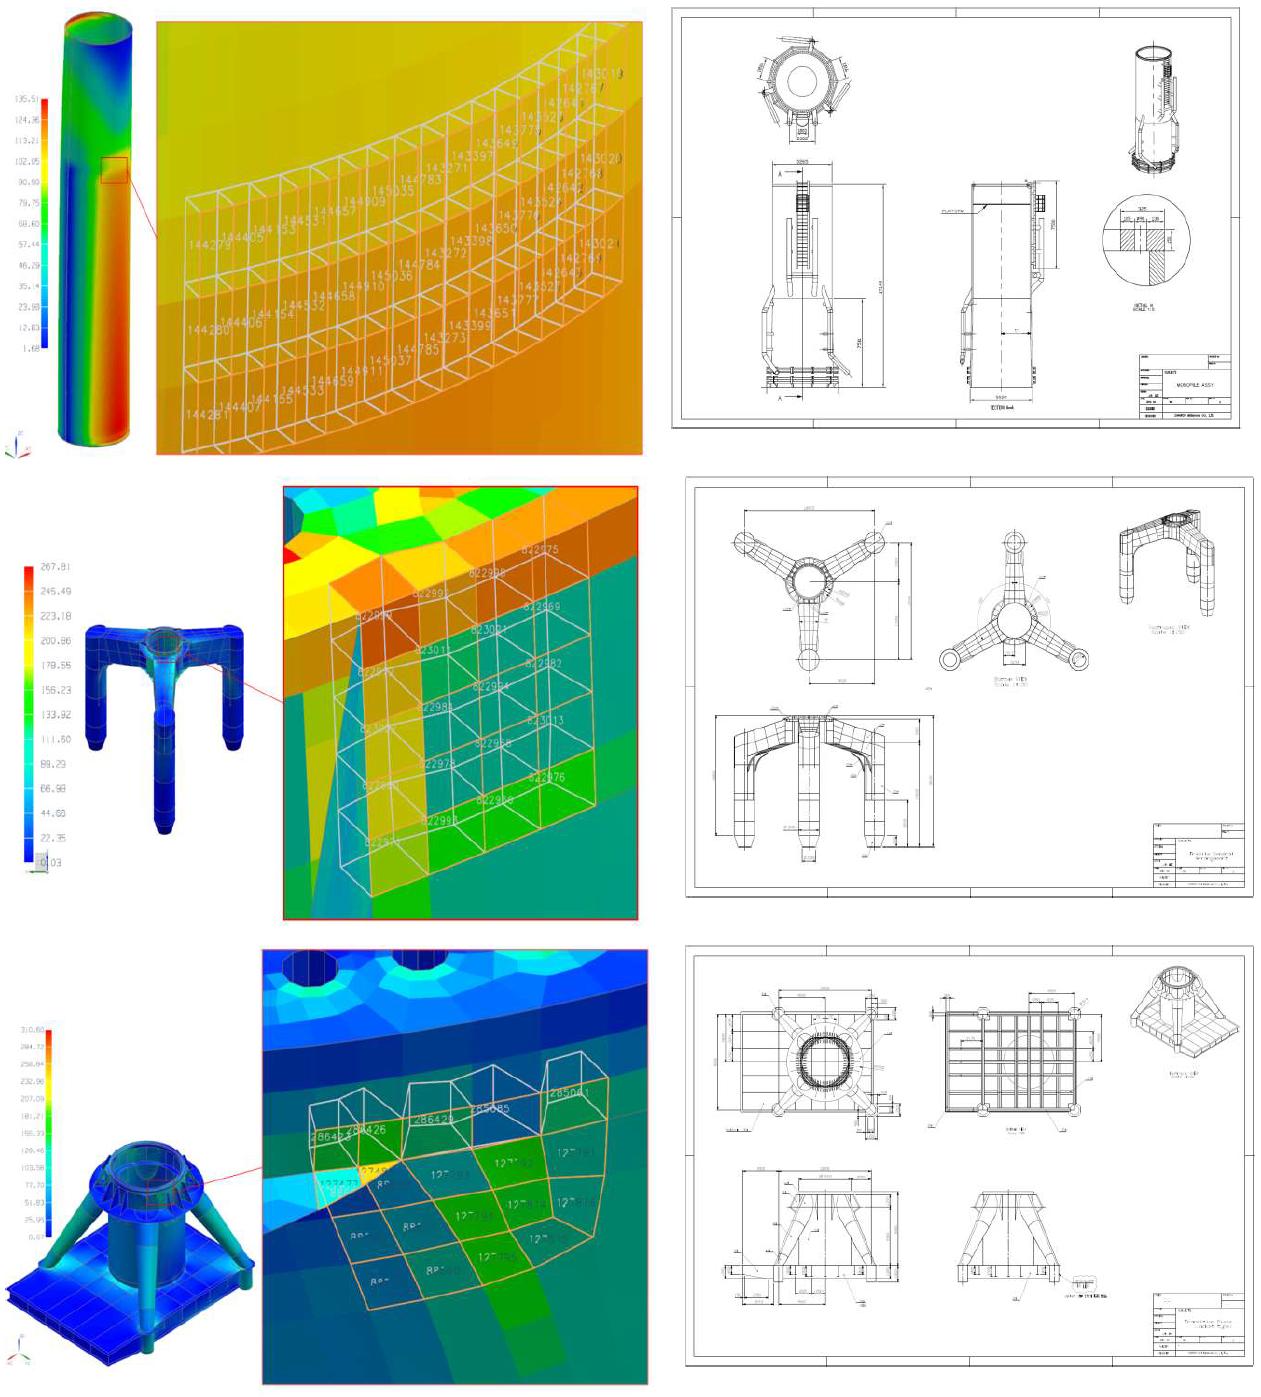 Design of transition pieces of fixed type support structures